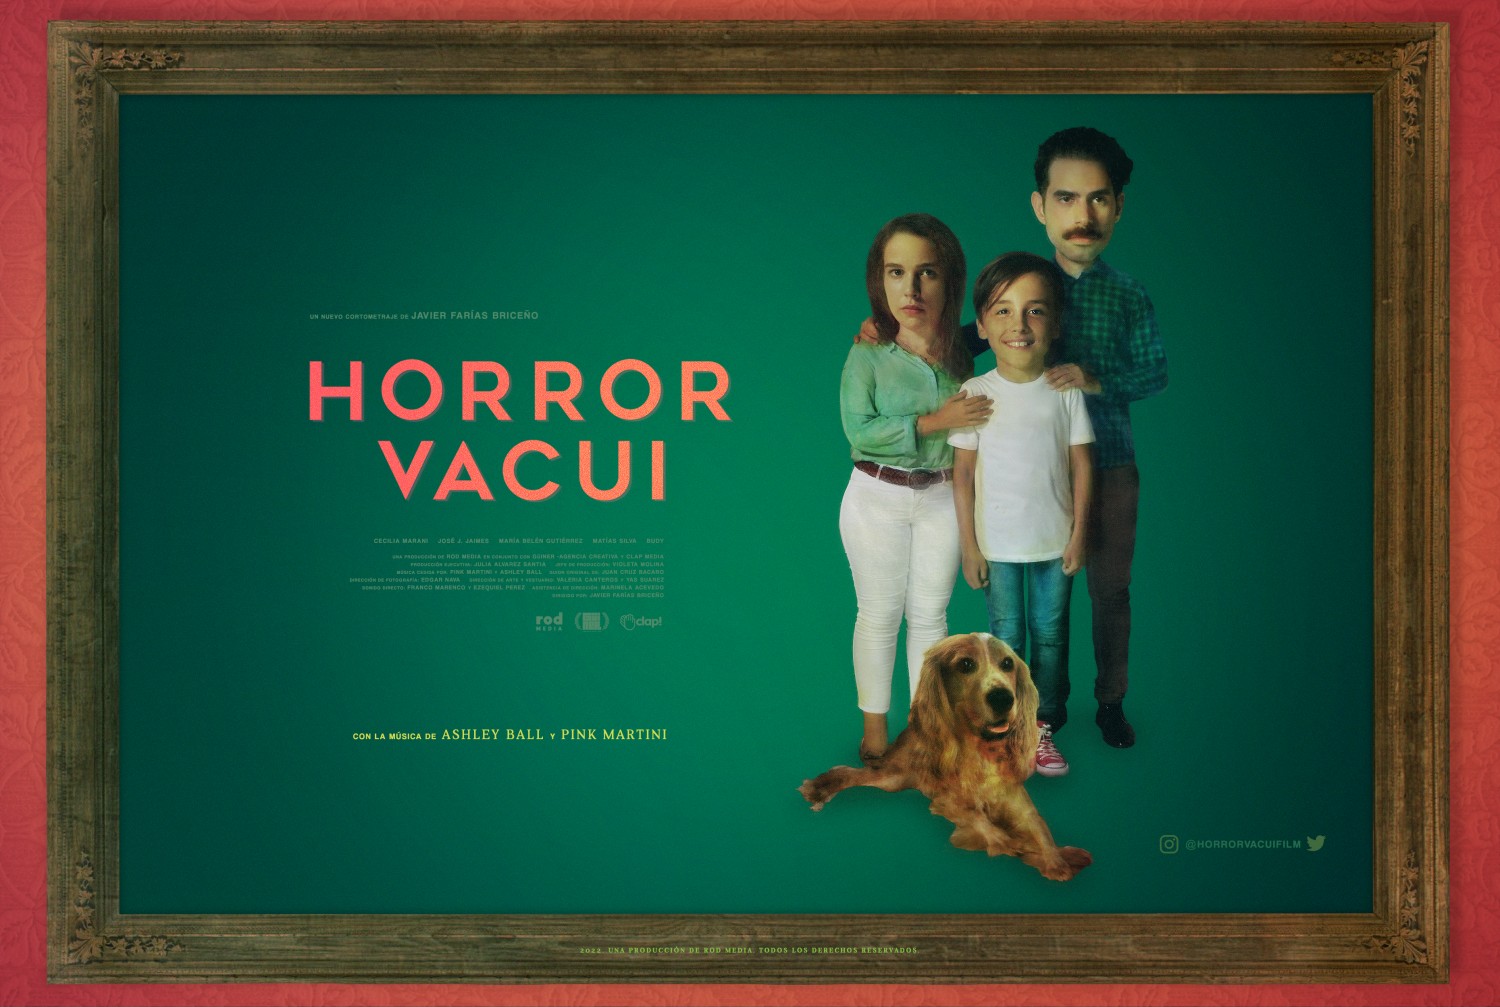 Extra Large Movie Poster Image for Horror Vacui